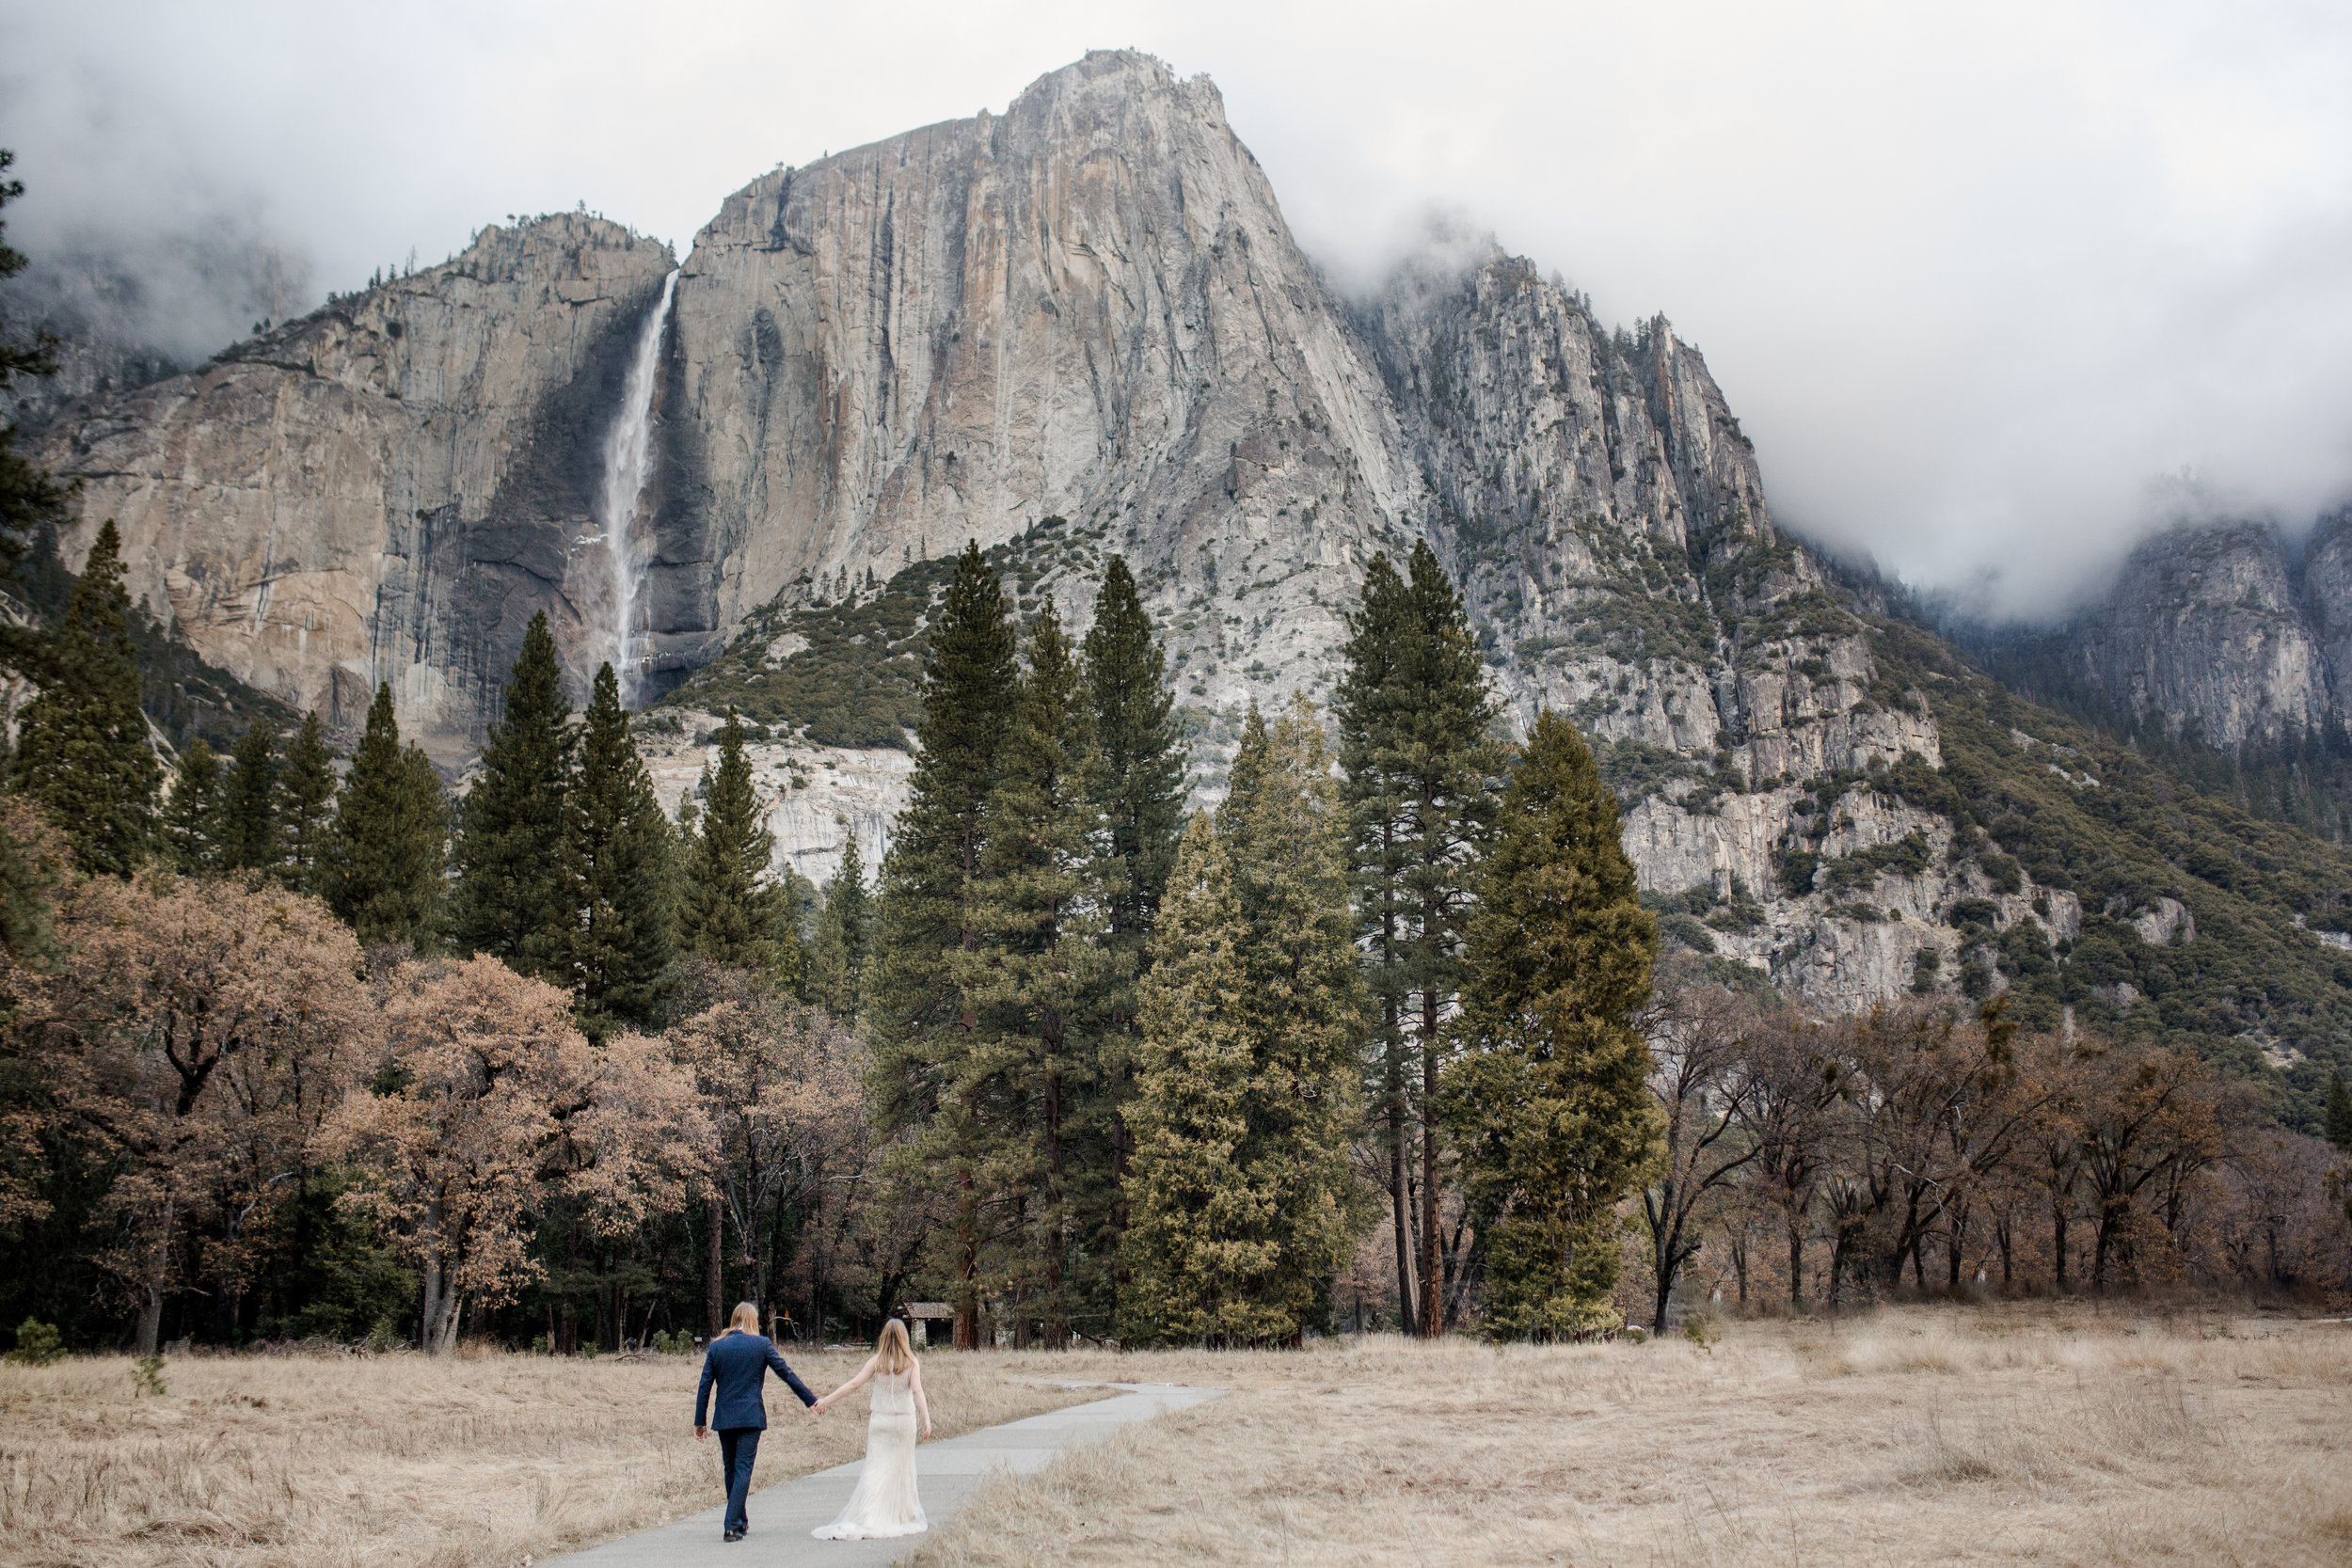 nicole-daacke-photography-yousemite-national-park-elopement-photographer-winter-cloud-moody-elope-inspiration-yosemite-valley-tunnel-view-winter-cloud-fog-weather-wedding-photos-22.jpg